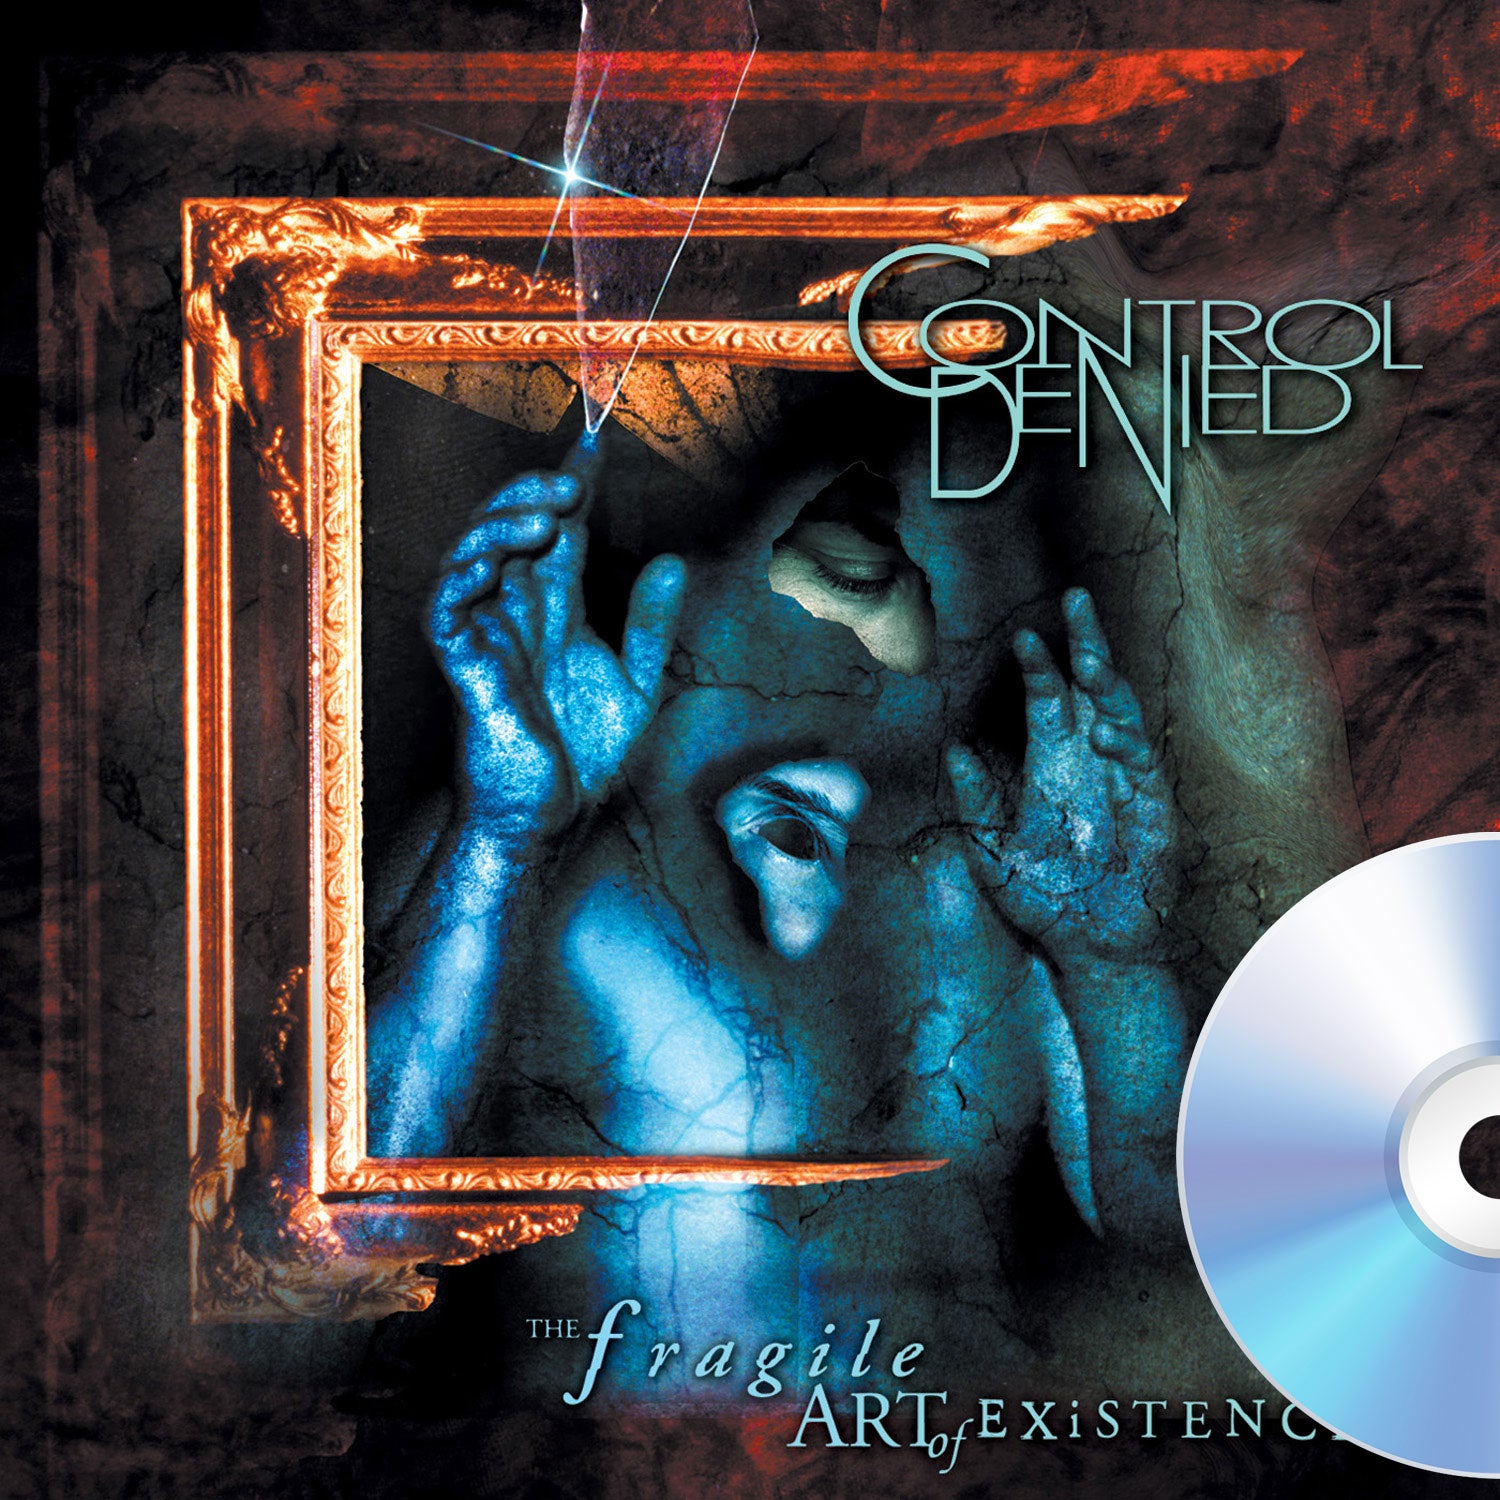 Control Denied "Fragile Art of Existence (Reissue)" 2xCD